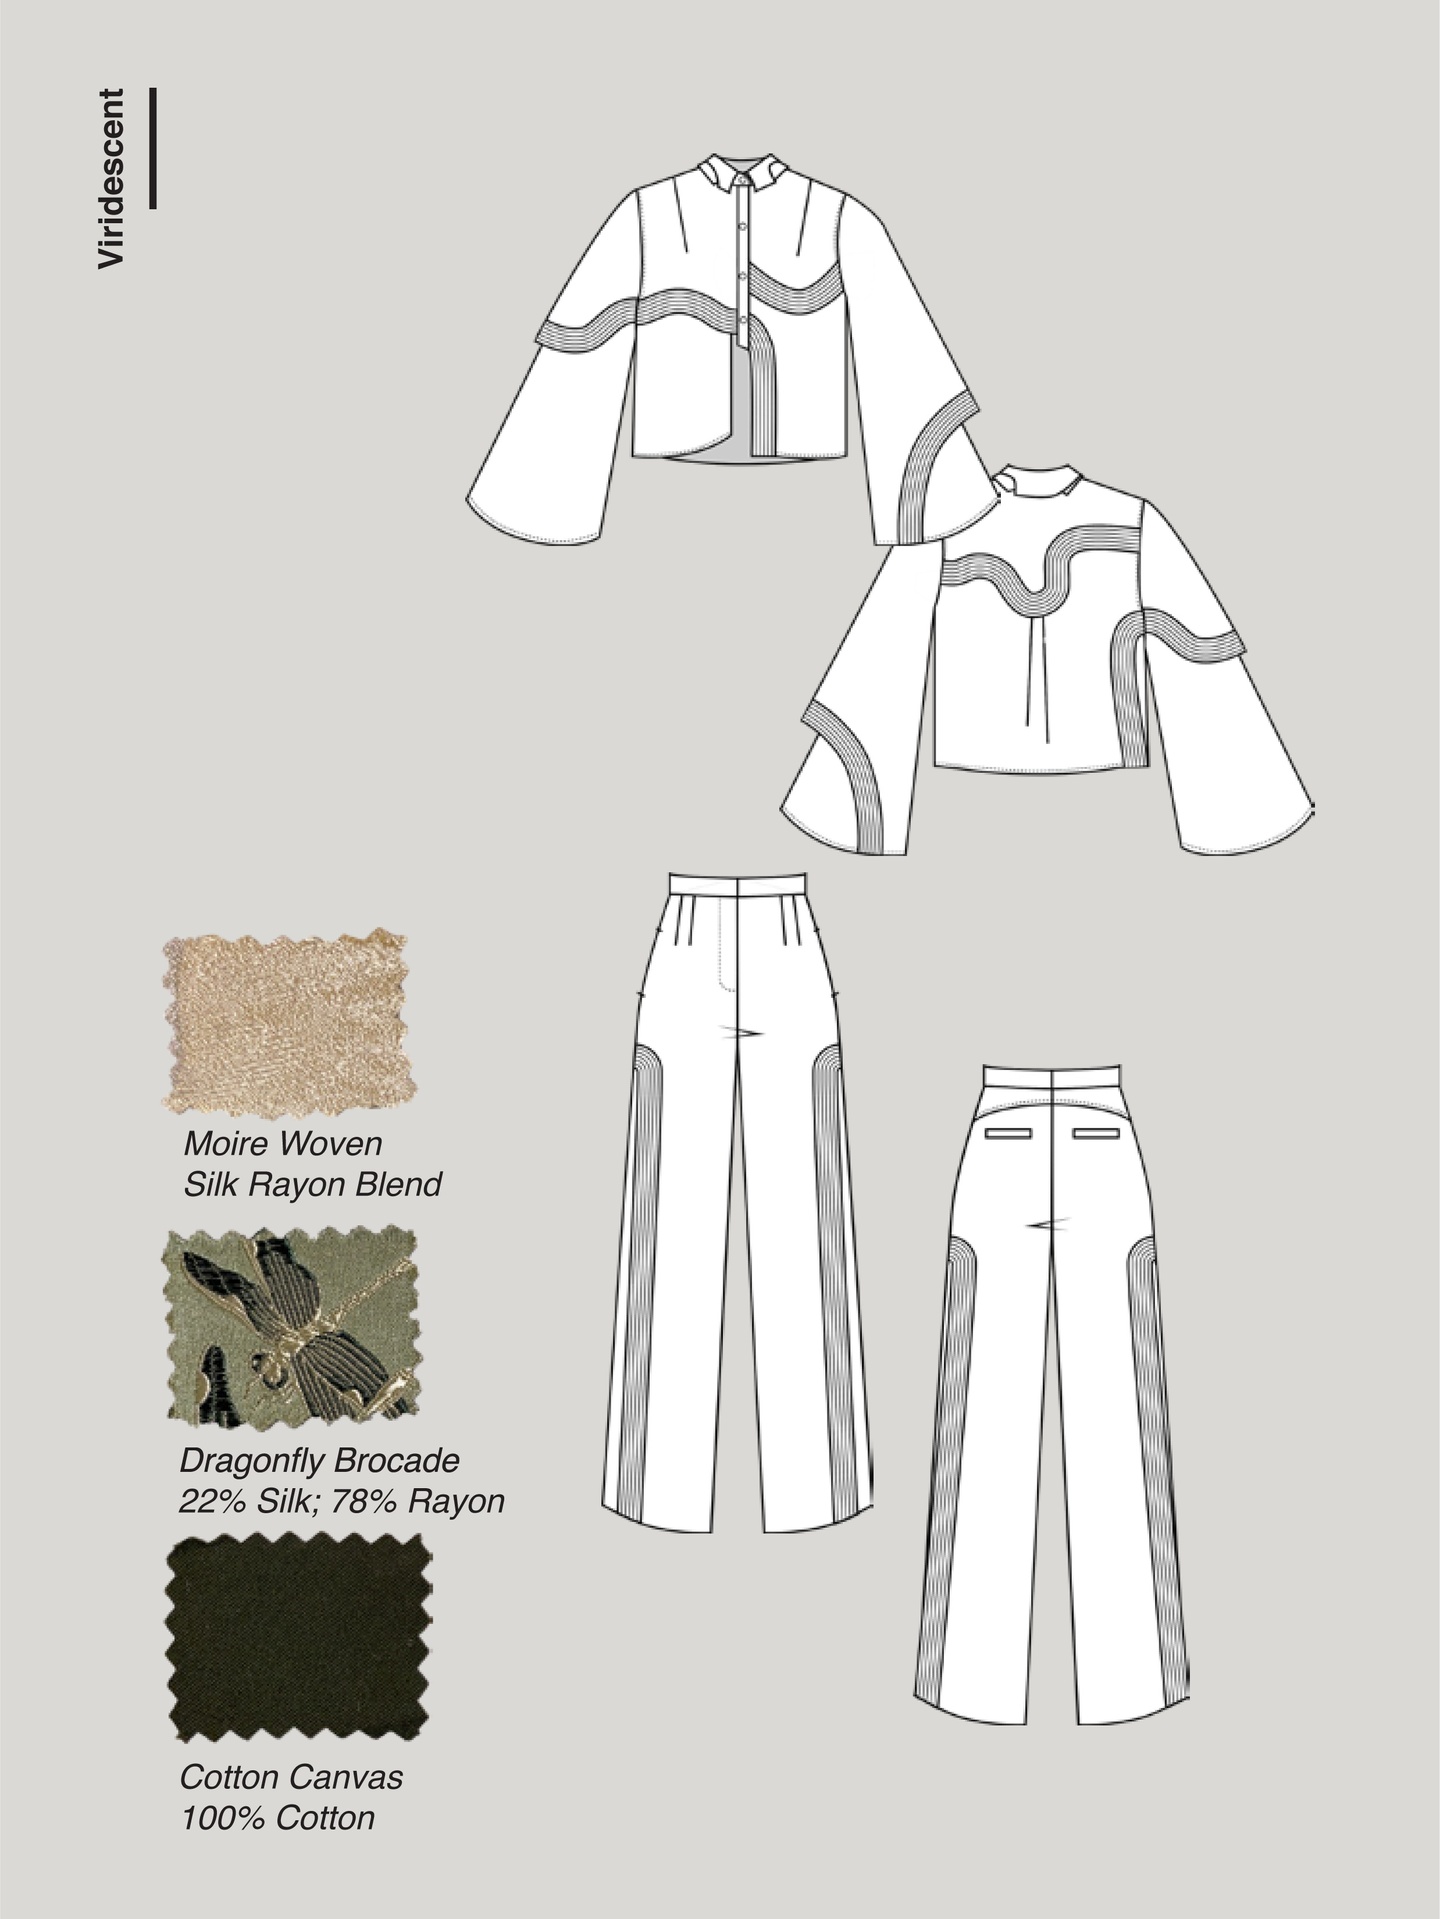 Fashion design garment construction illustration of a top with wide sleeves and bands of detailing and trousers with a high slit on each leg. Three fabric samples are included to the right - a beige Moire Woven Silk Rayon Blend, a green Dragonfly Brocade, and a dark green Cotton Canvas.